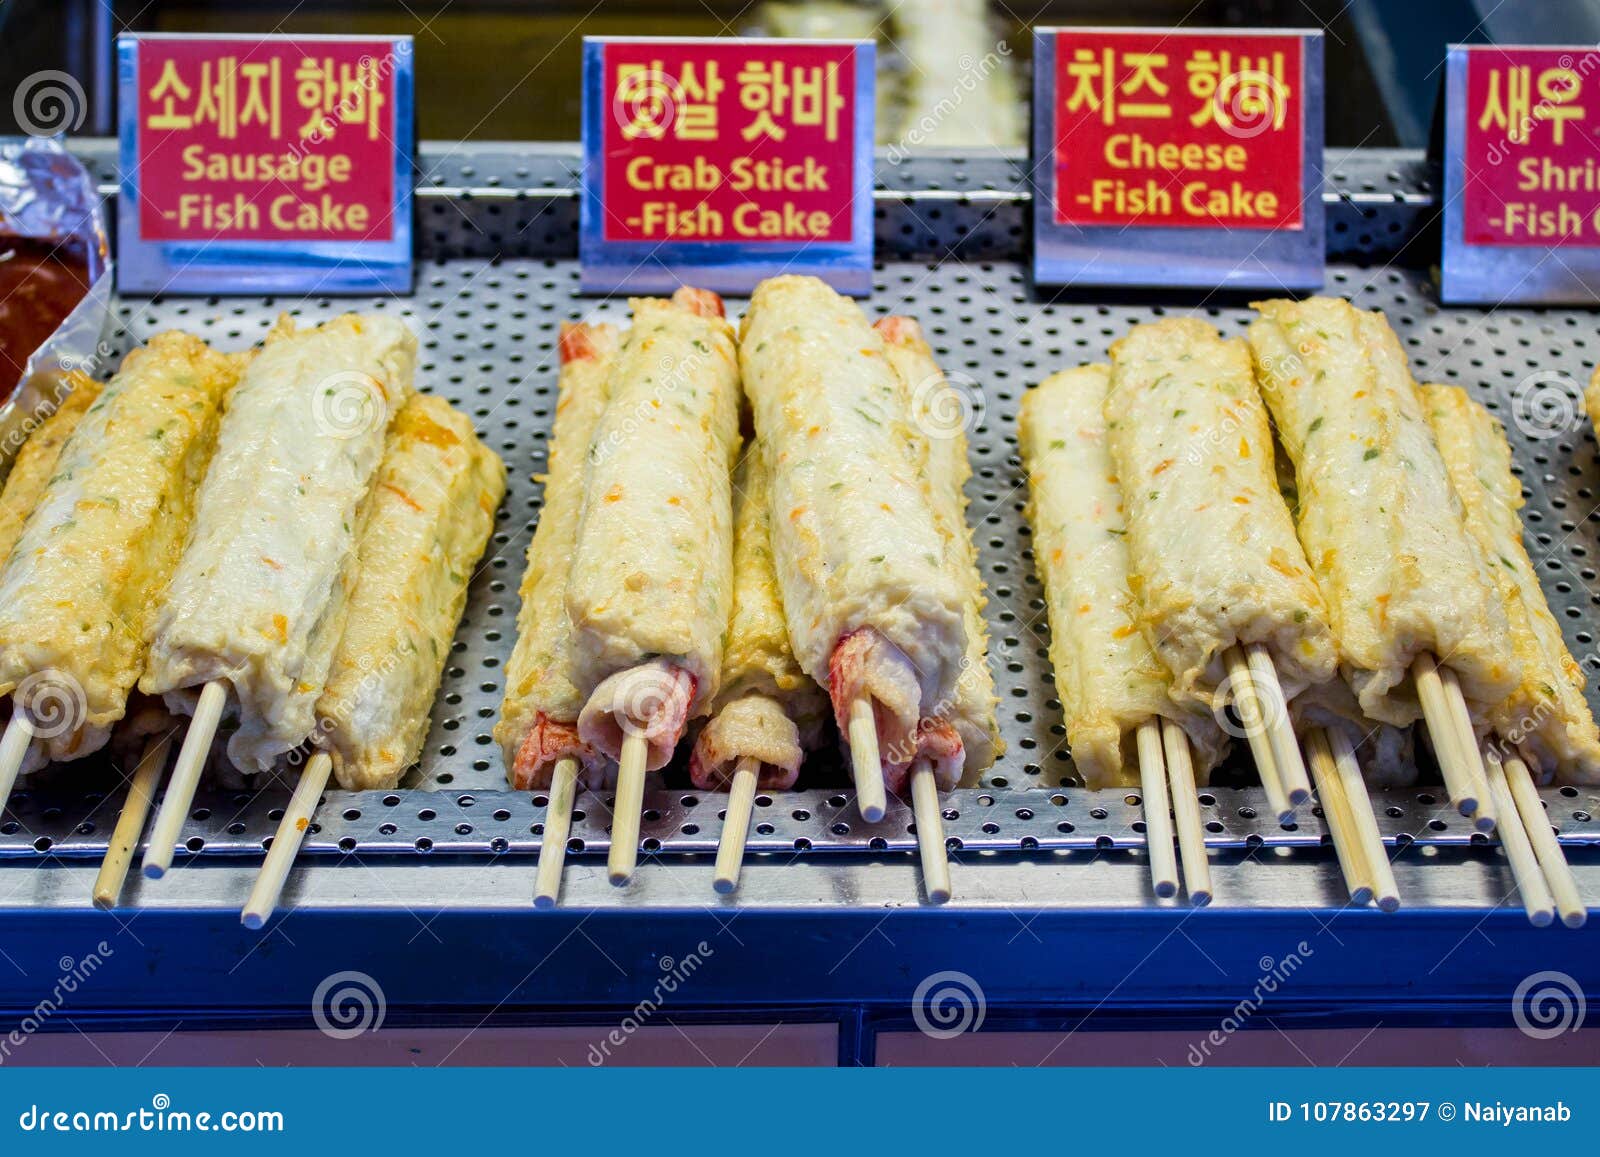 Crab stick and fish cake stock image. Image of vegetable